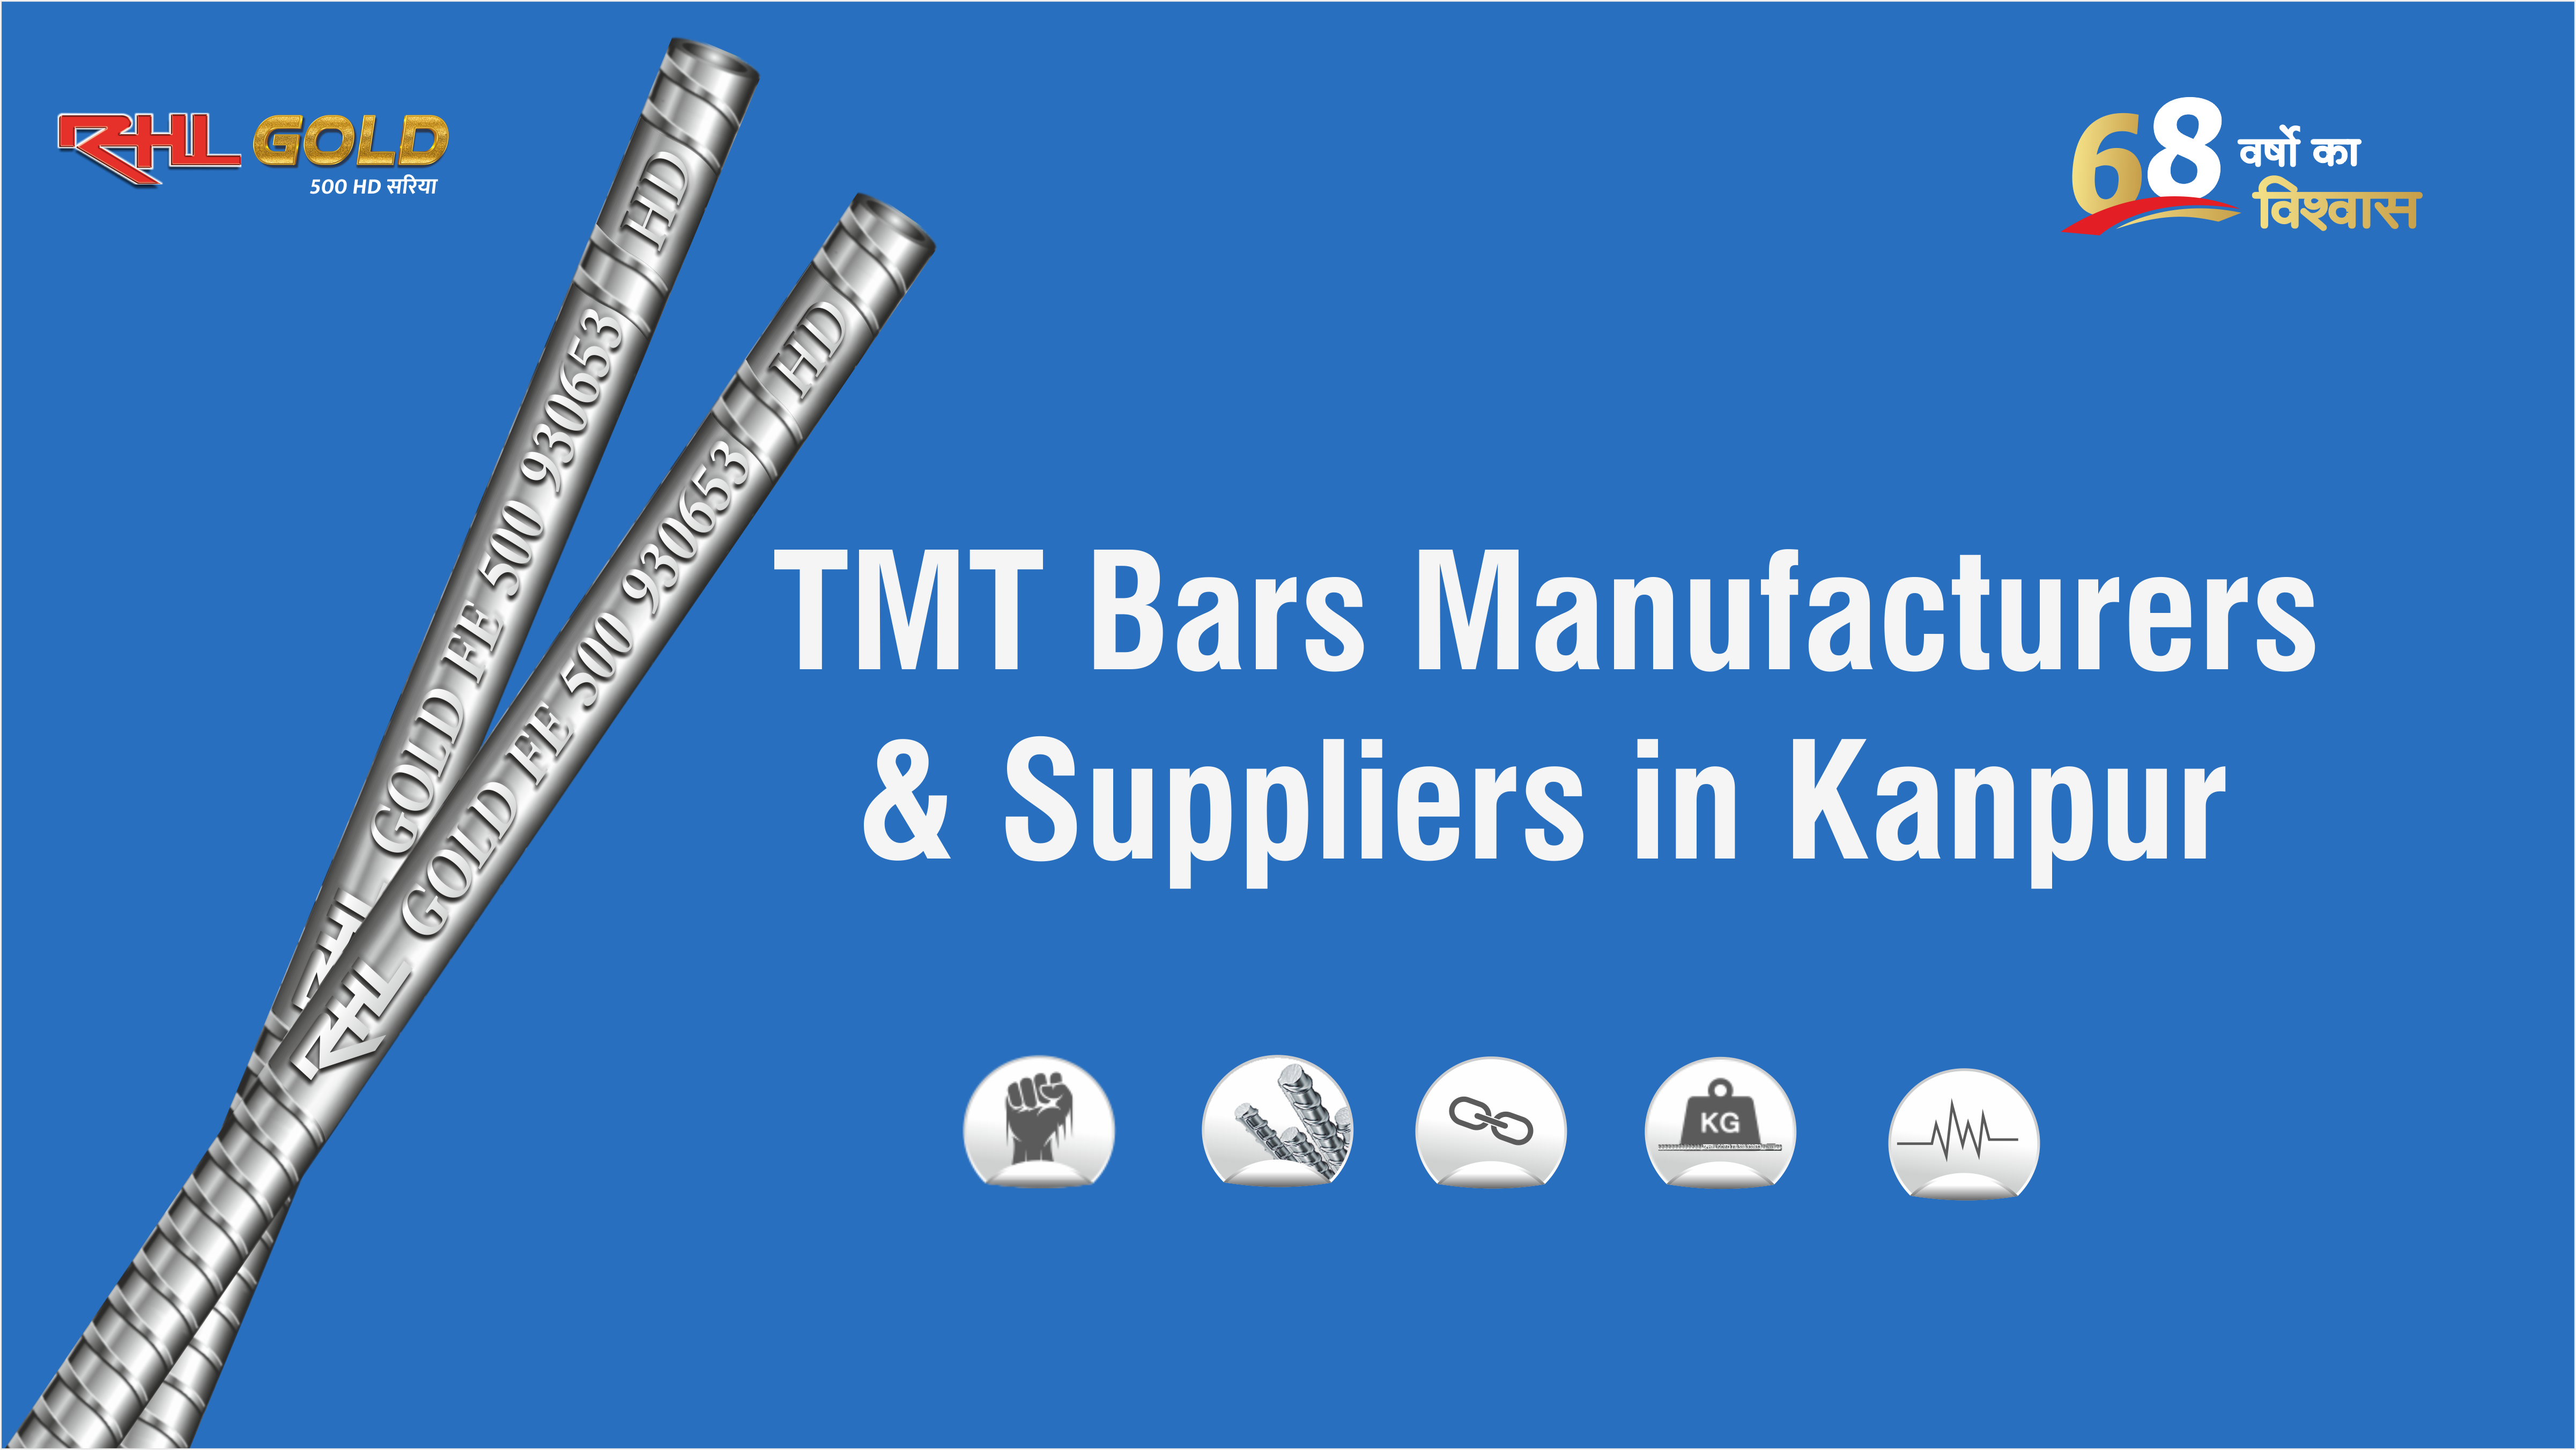 TMT Bars Manufacturers & Suppliers in Kanpur